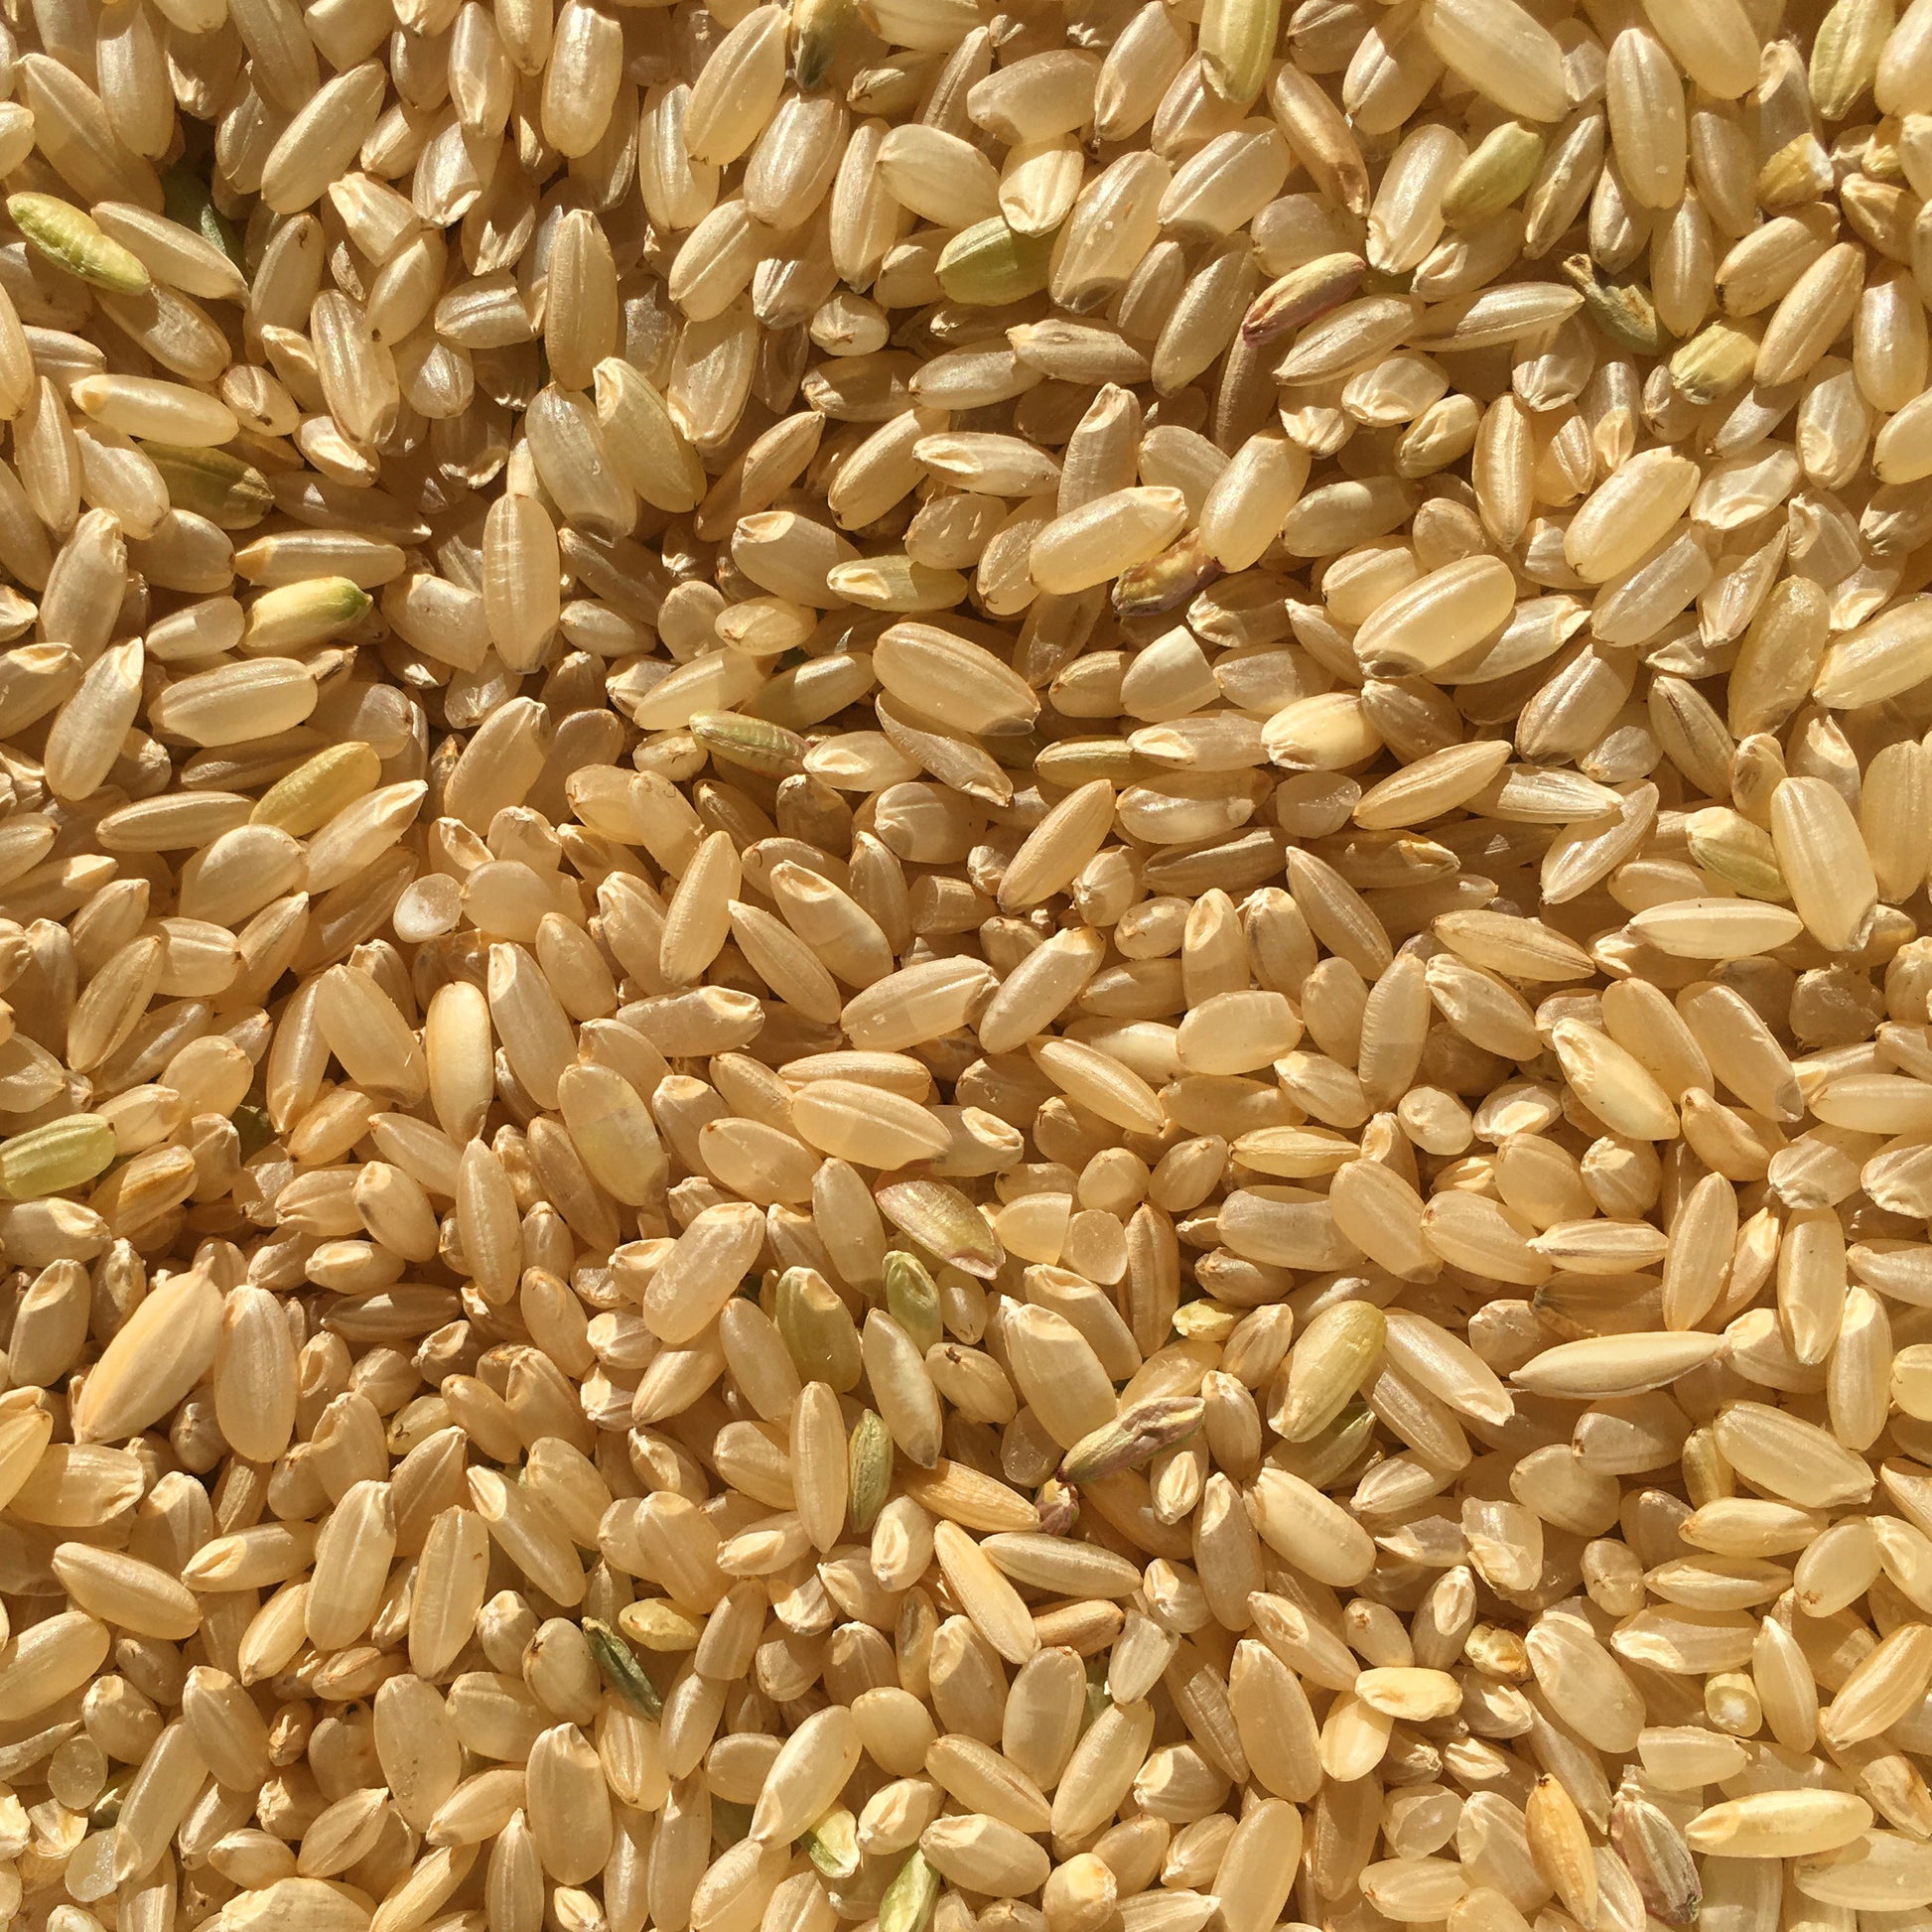 Chico Rice's Brown Rice | Close Up of Brown Rice